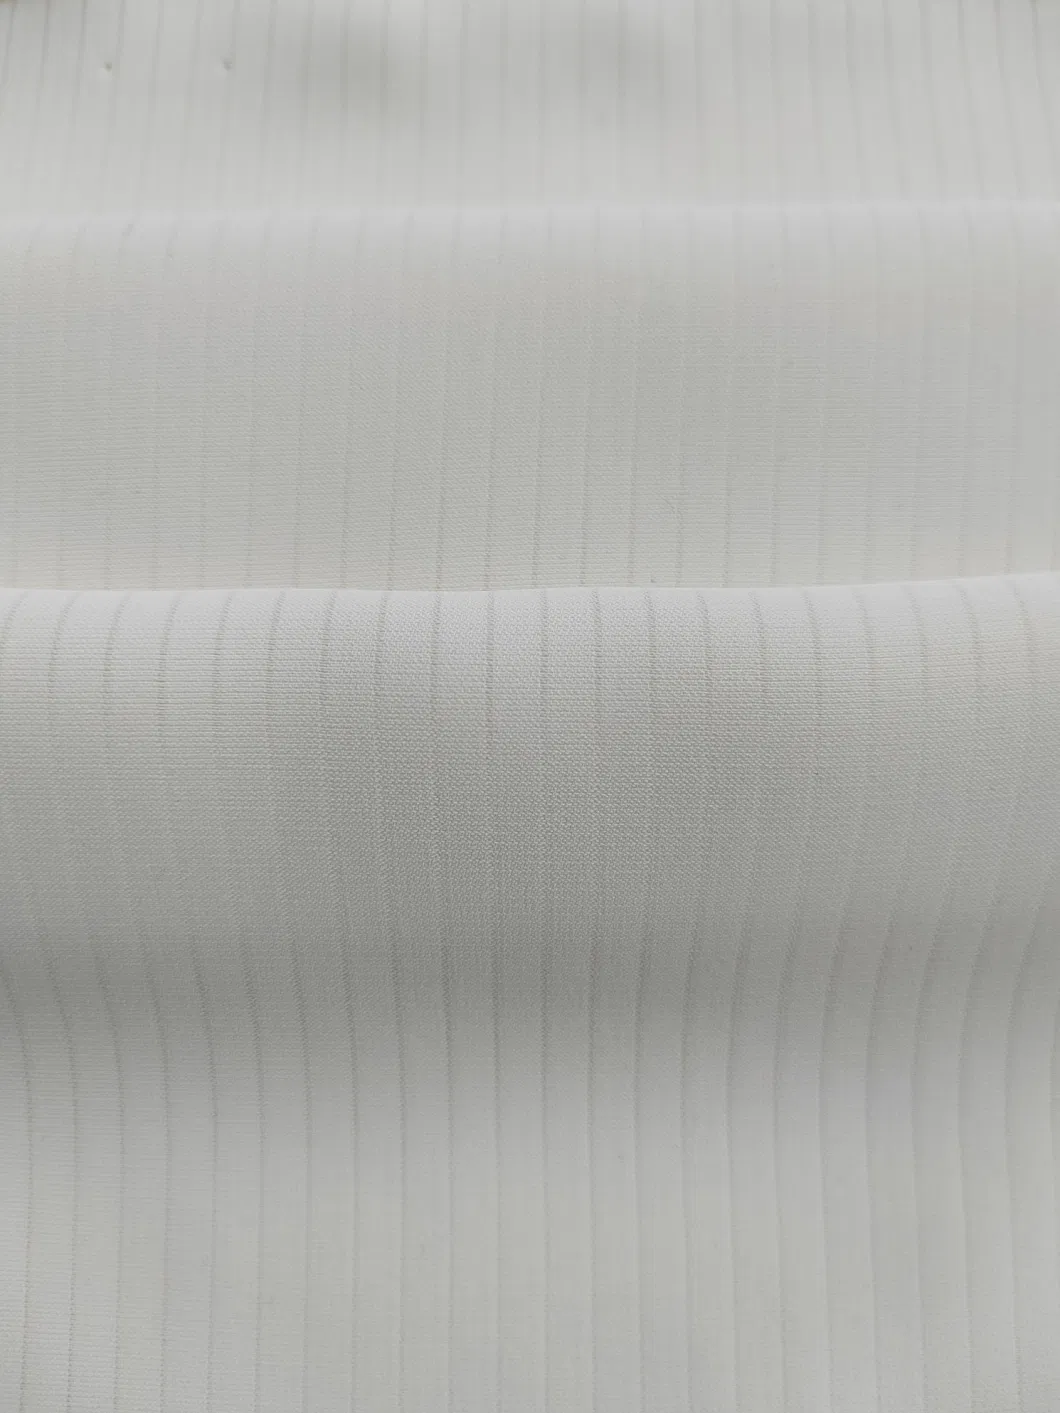 Regular Striped Polyester Fabric for Clothing